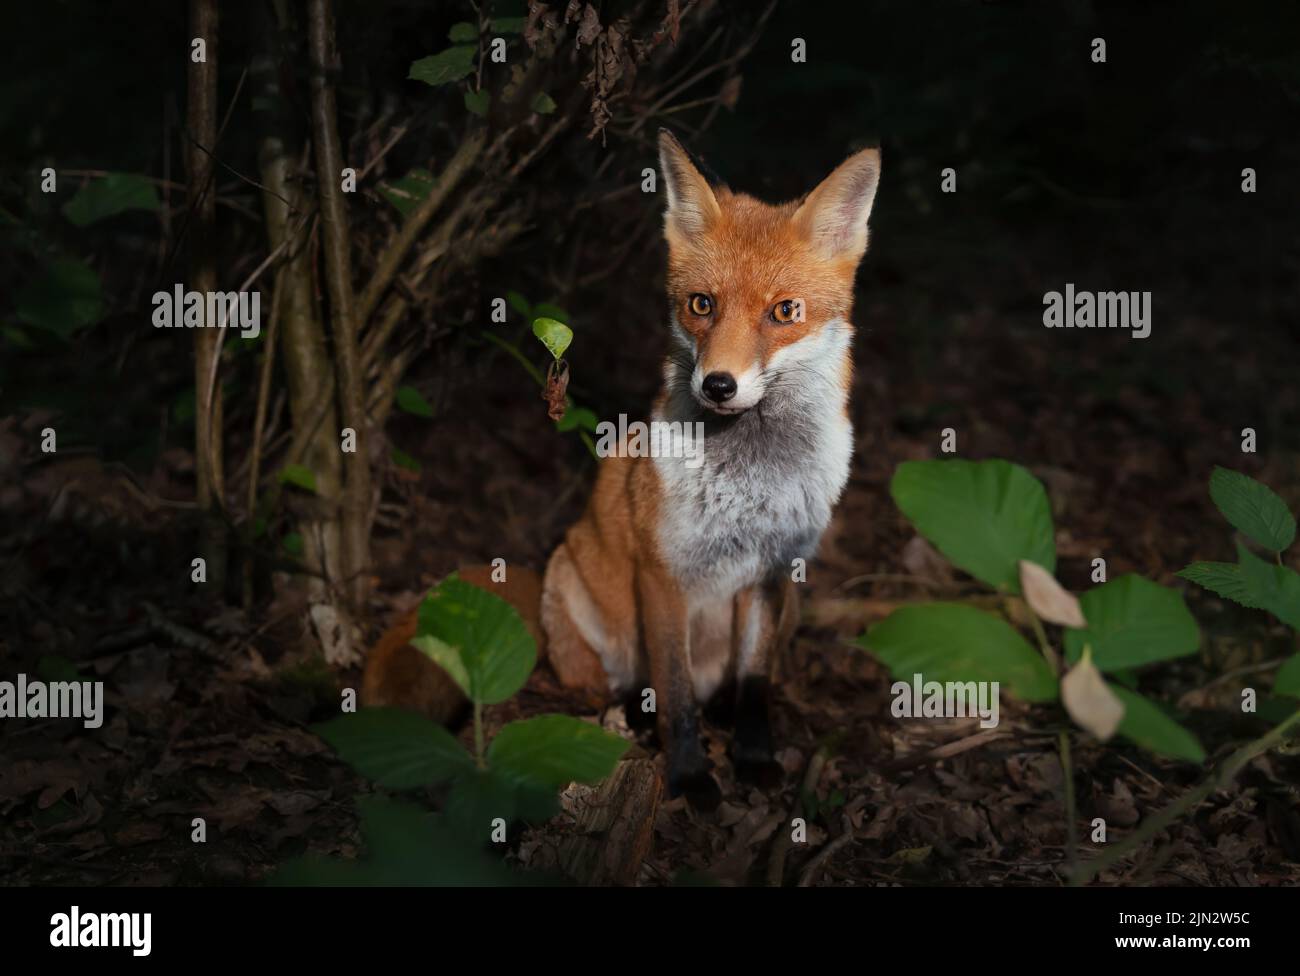 Close up of a Red fox (Vulpes vulpes) in forest in the evening, UK. Stock Photo